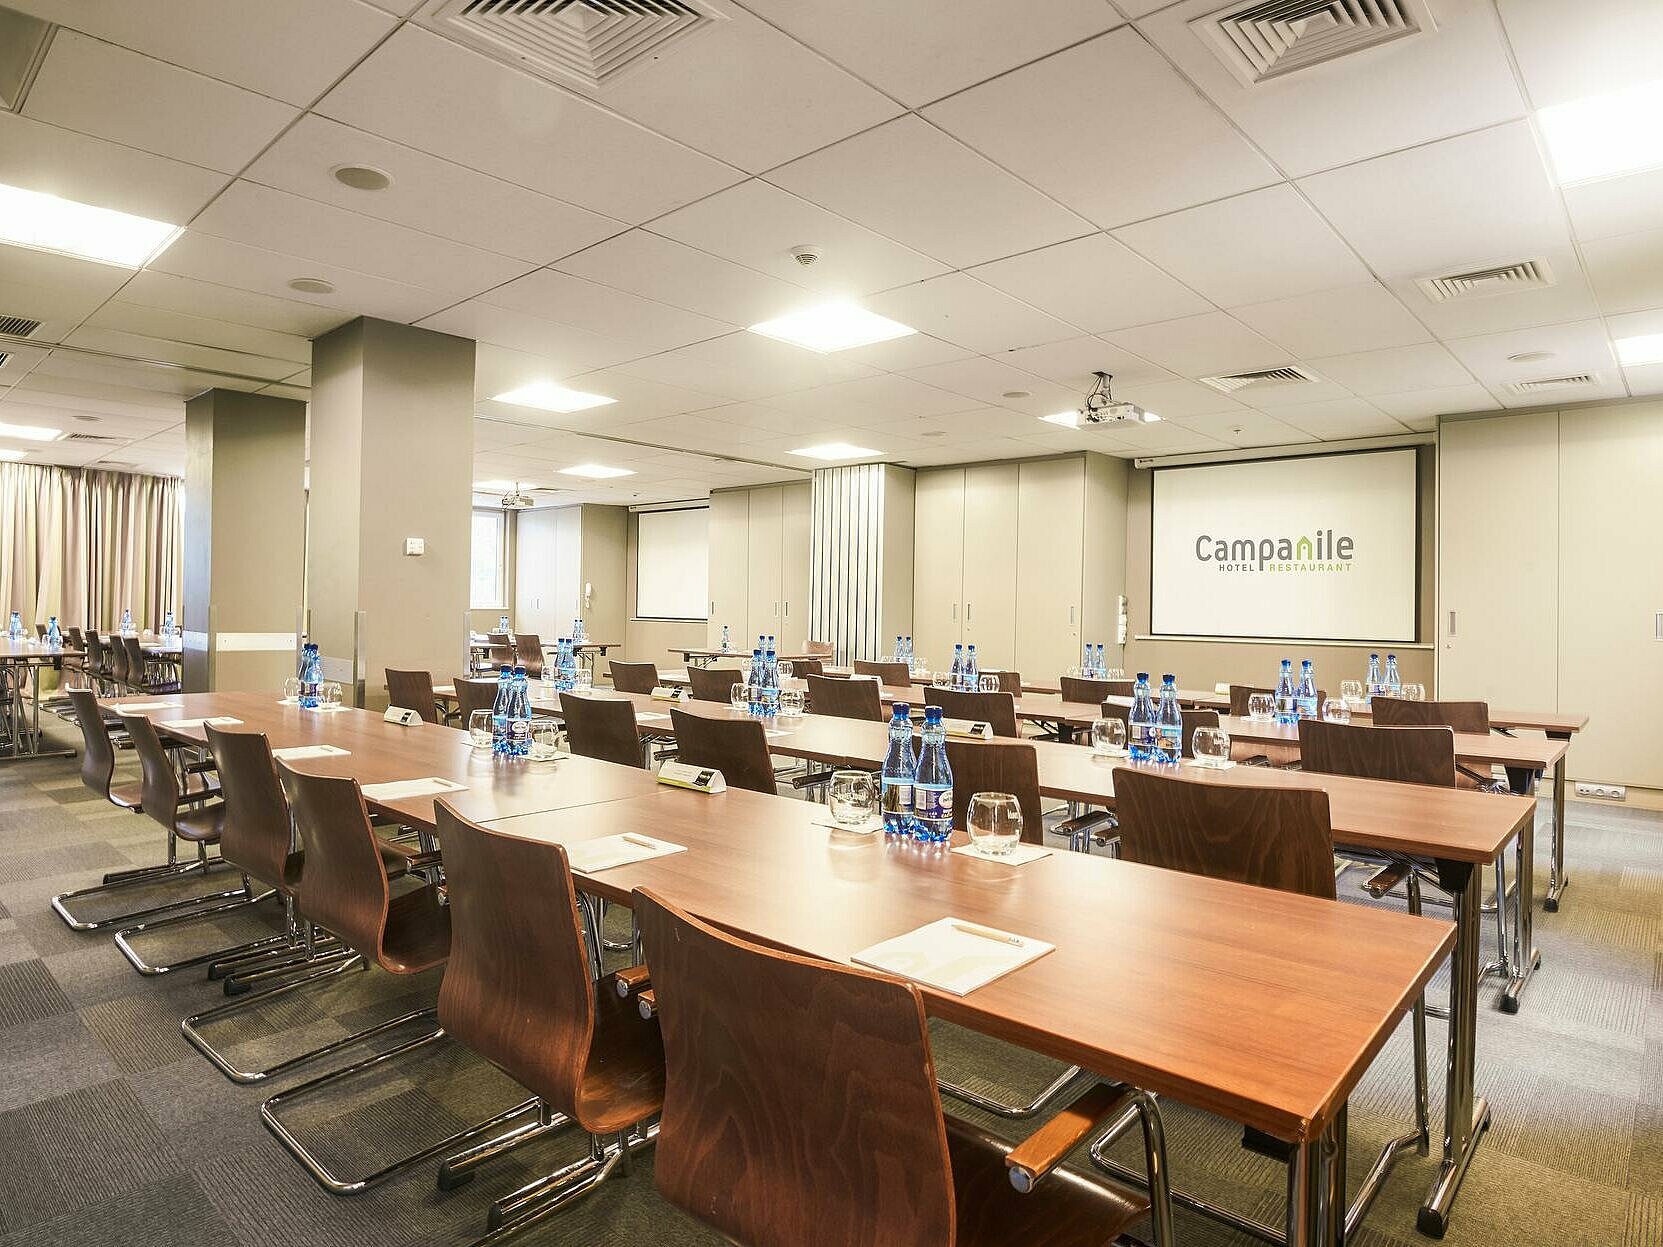 Campanile Hotel conference space 